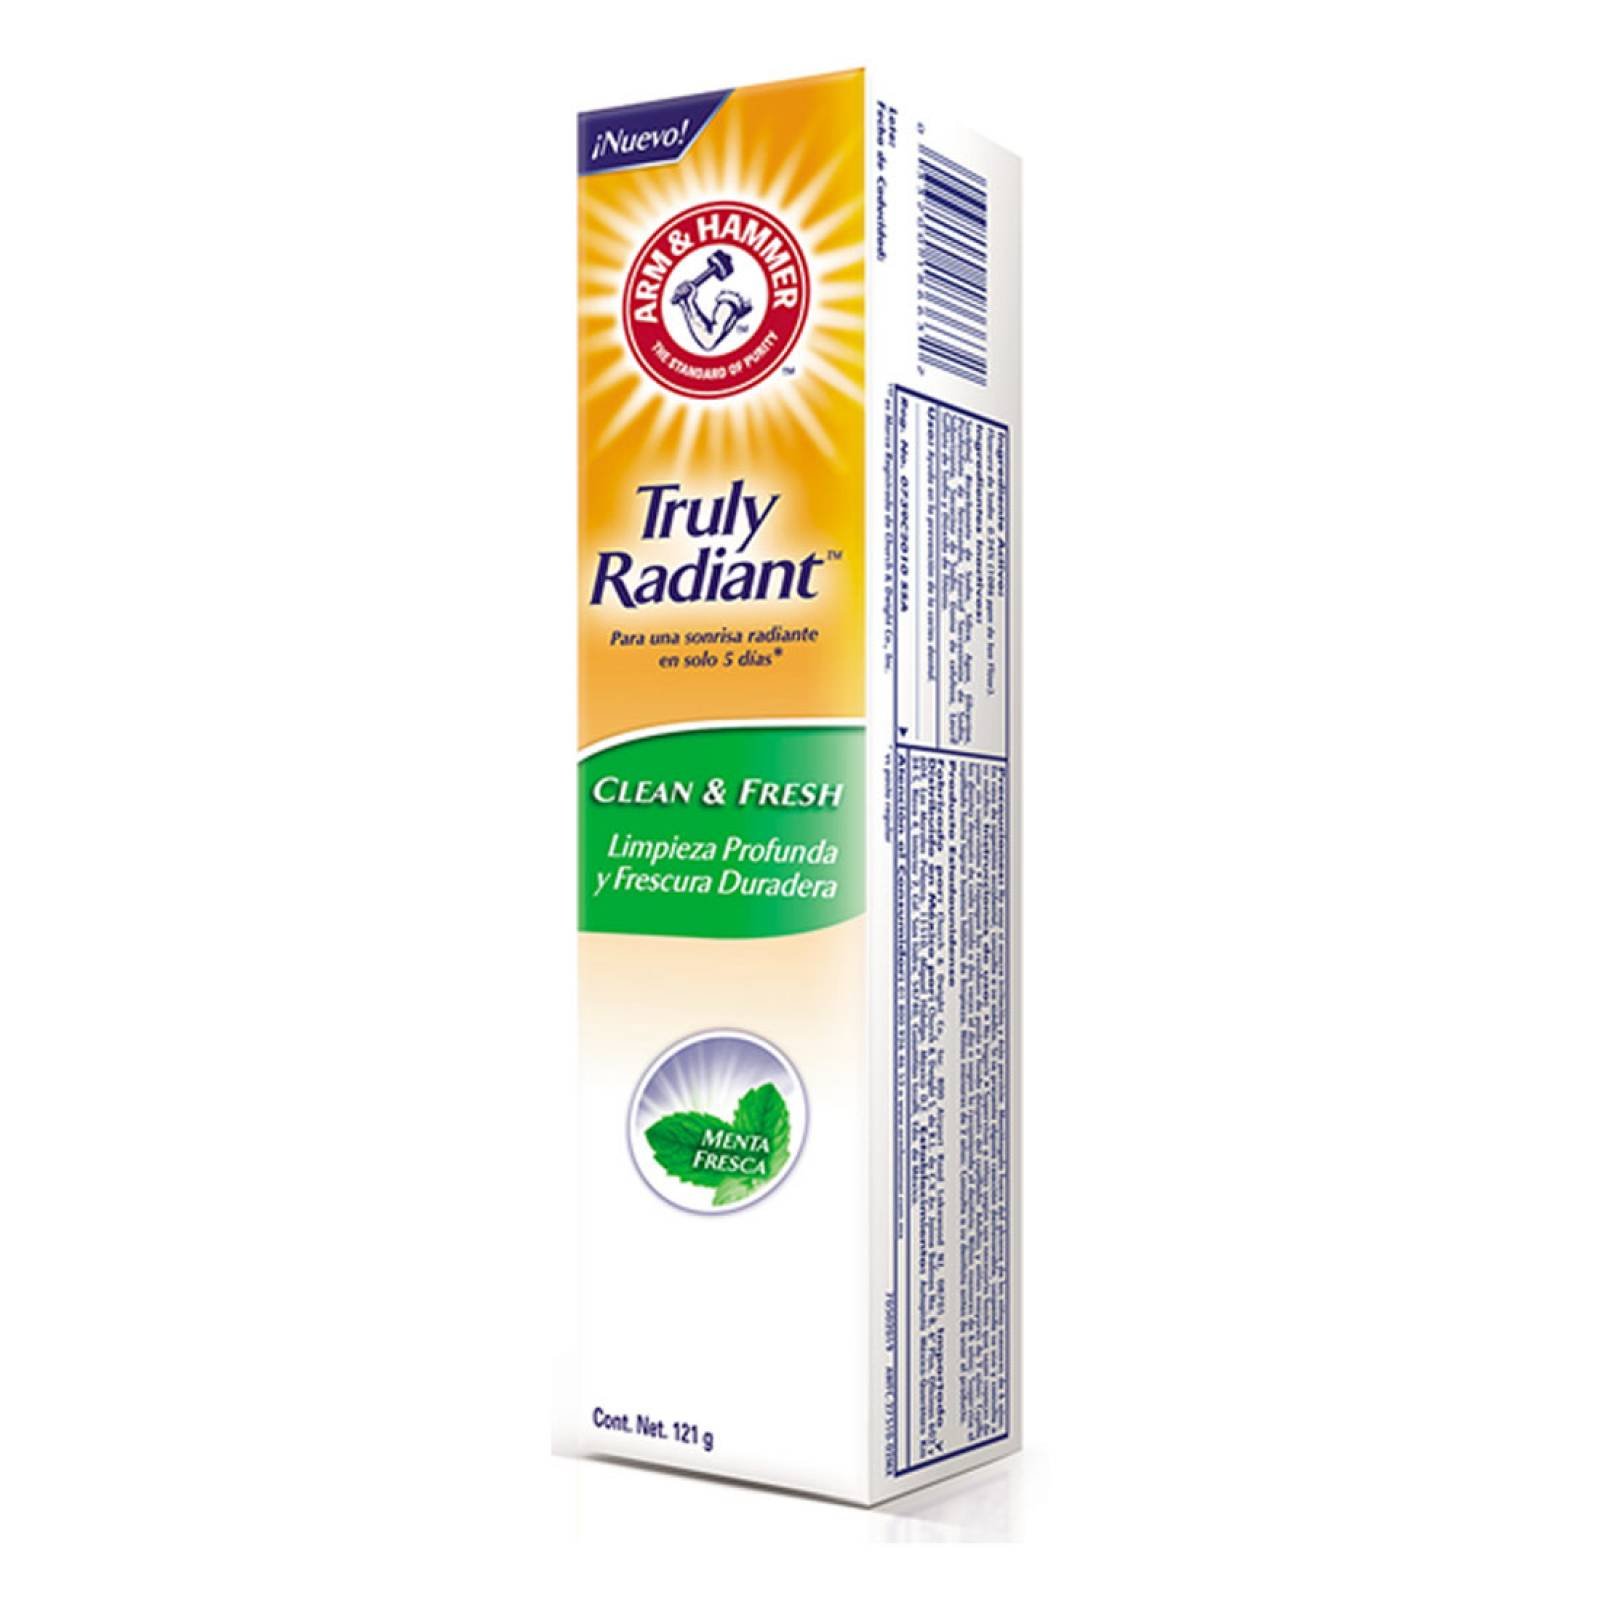 Pasta Dental Truly Radiant Clean and Fresh Arm & Hammer